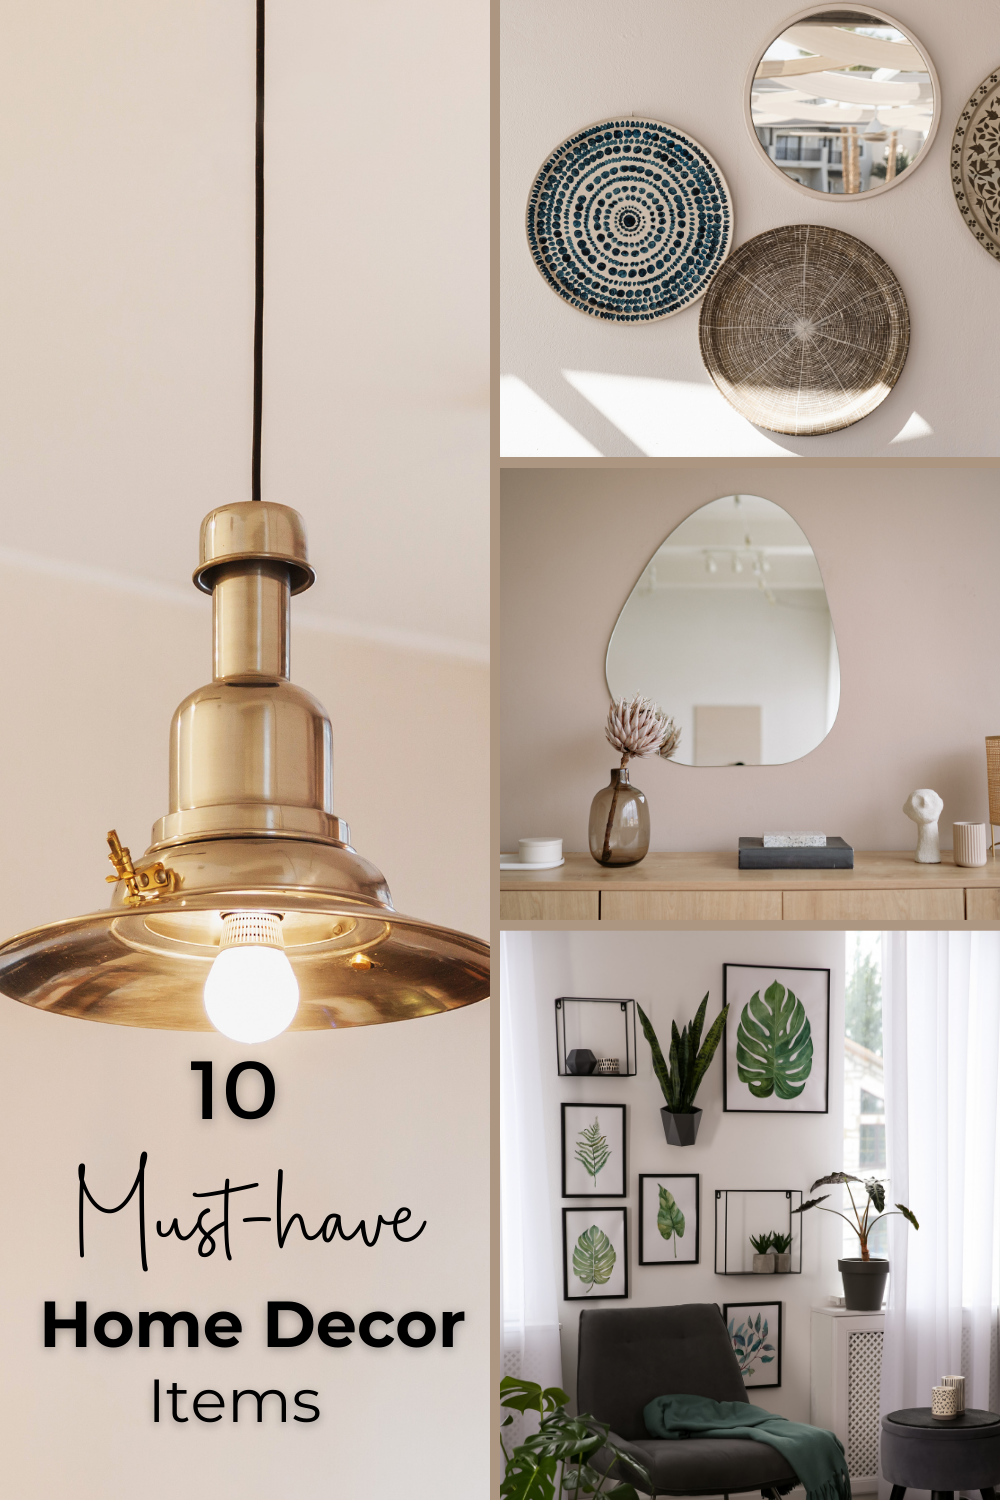 10 Must-Have Home Decor Items